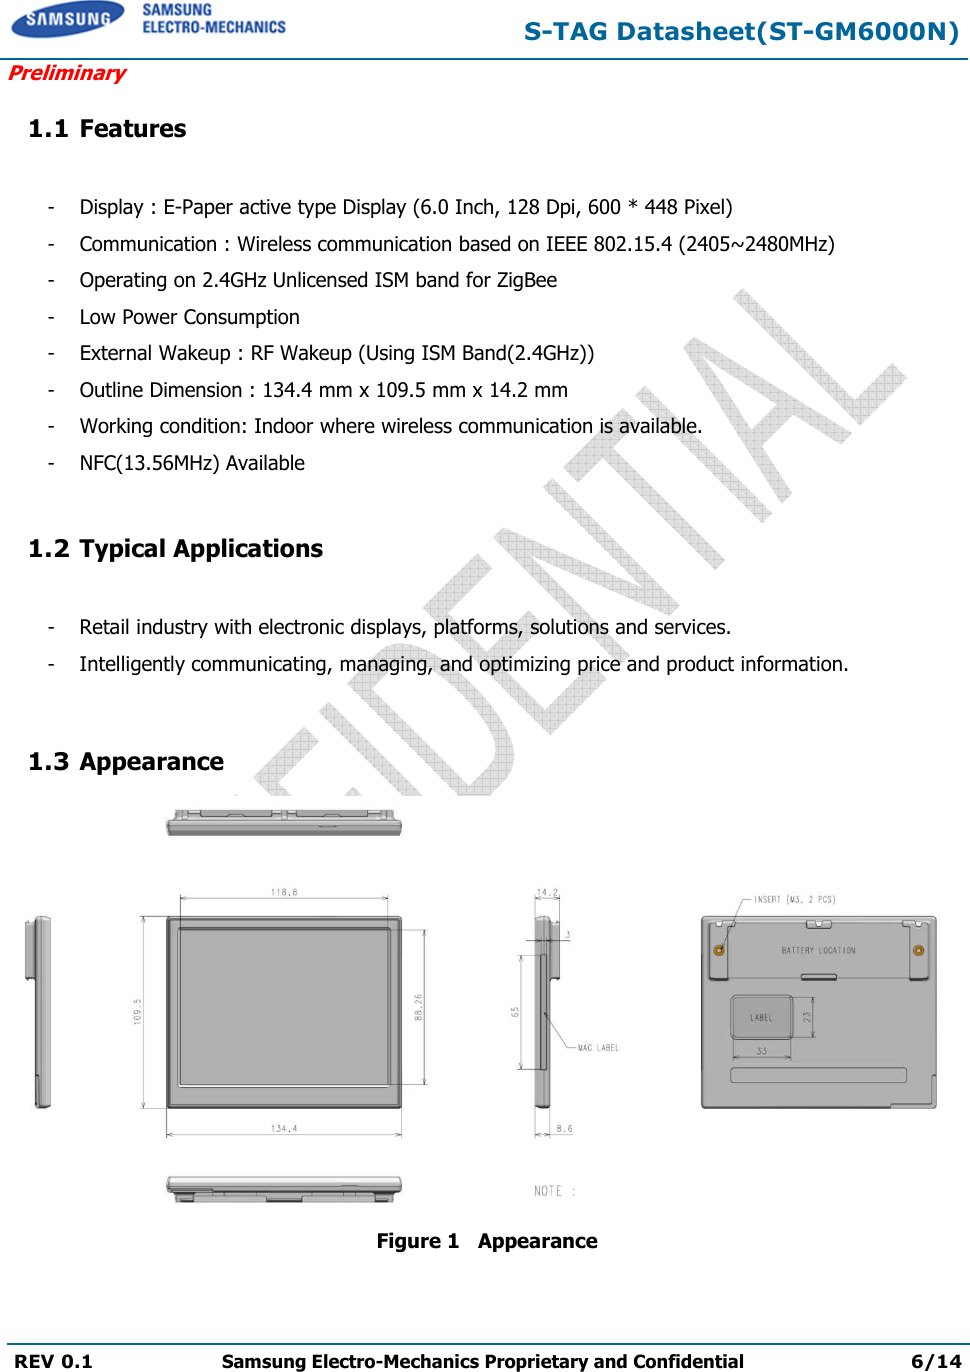 S-TAG Datasheet(ST-GM6000N) Preliminary REV 0.1  Samsung Electro-Mechanics Proprietary and Confidential 6/14 1.1 Features - Display : E-Paper active type Display (6.0 Inch, 128 Dpi, 600 * 448 Pixel) - Communication : Wireless communication based on IEEE 802.15.4 (2405~2480MHz)- Operating on 2.4GHz Unlicensed ISM band for ZigBee- Low Power Consumption- External Wakeup : RF Wakeup (Using ISM Band(2.4GHz))- Outline Dimension : 134.4 mm x 109.5 mm x 14.2 mm- Working condition: Indoor where wireless communication is available.- NFC(13.56MHz) Available1.2 Typical Applications -  Retail industry with electronic displays, platforms, solutions and services.-  Intelligently communicating, managing, and optimizing price and product information.1.3 Appearance  Figure 1   Appearance 